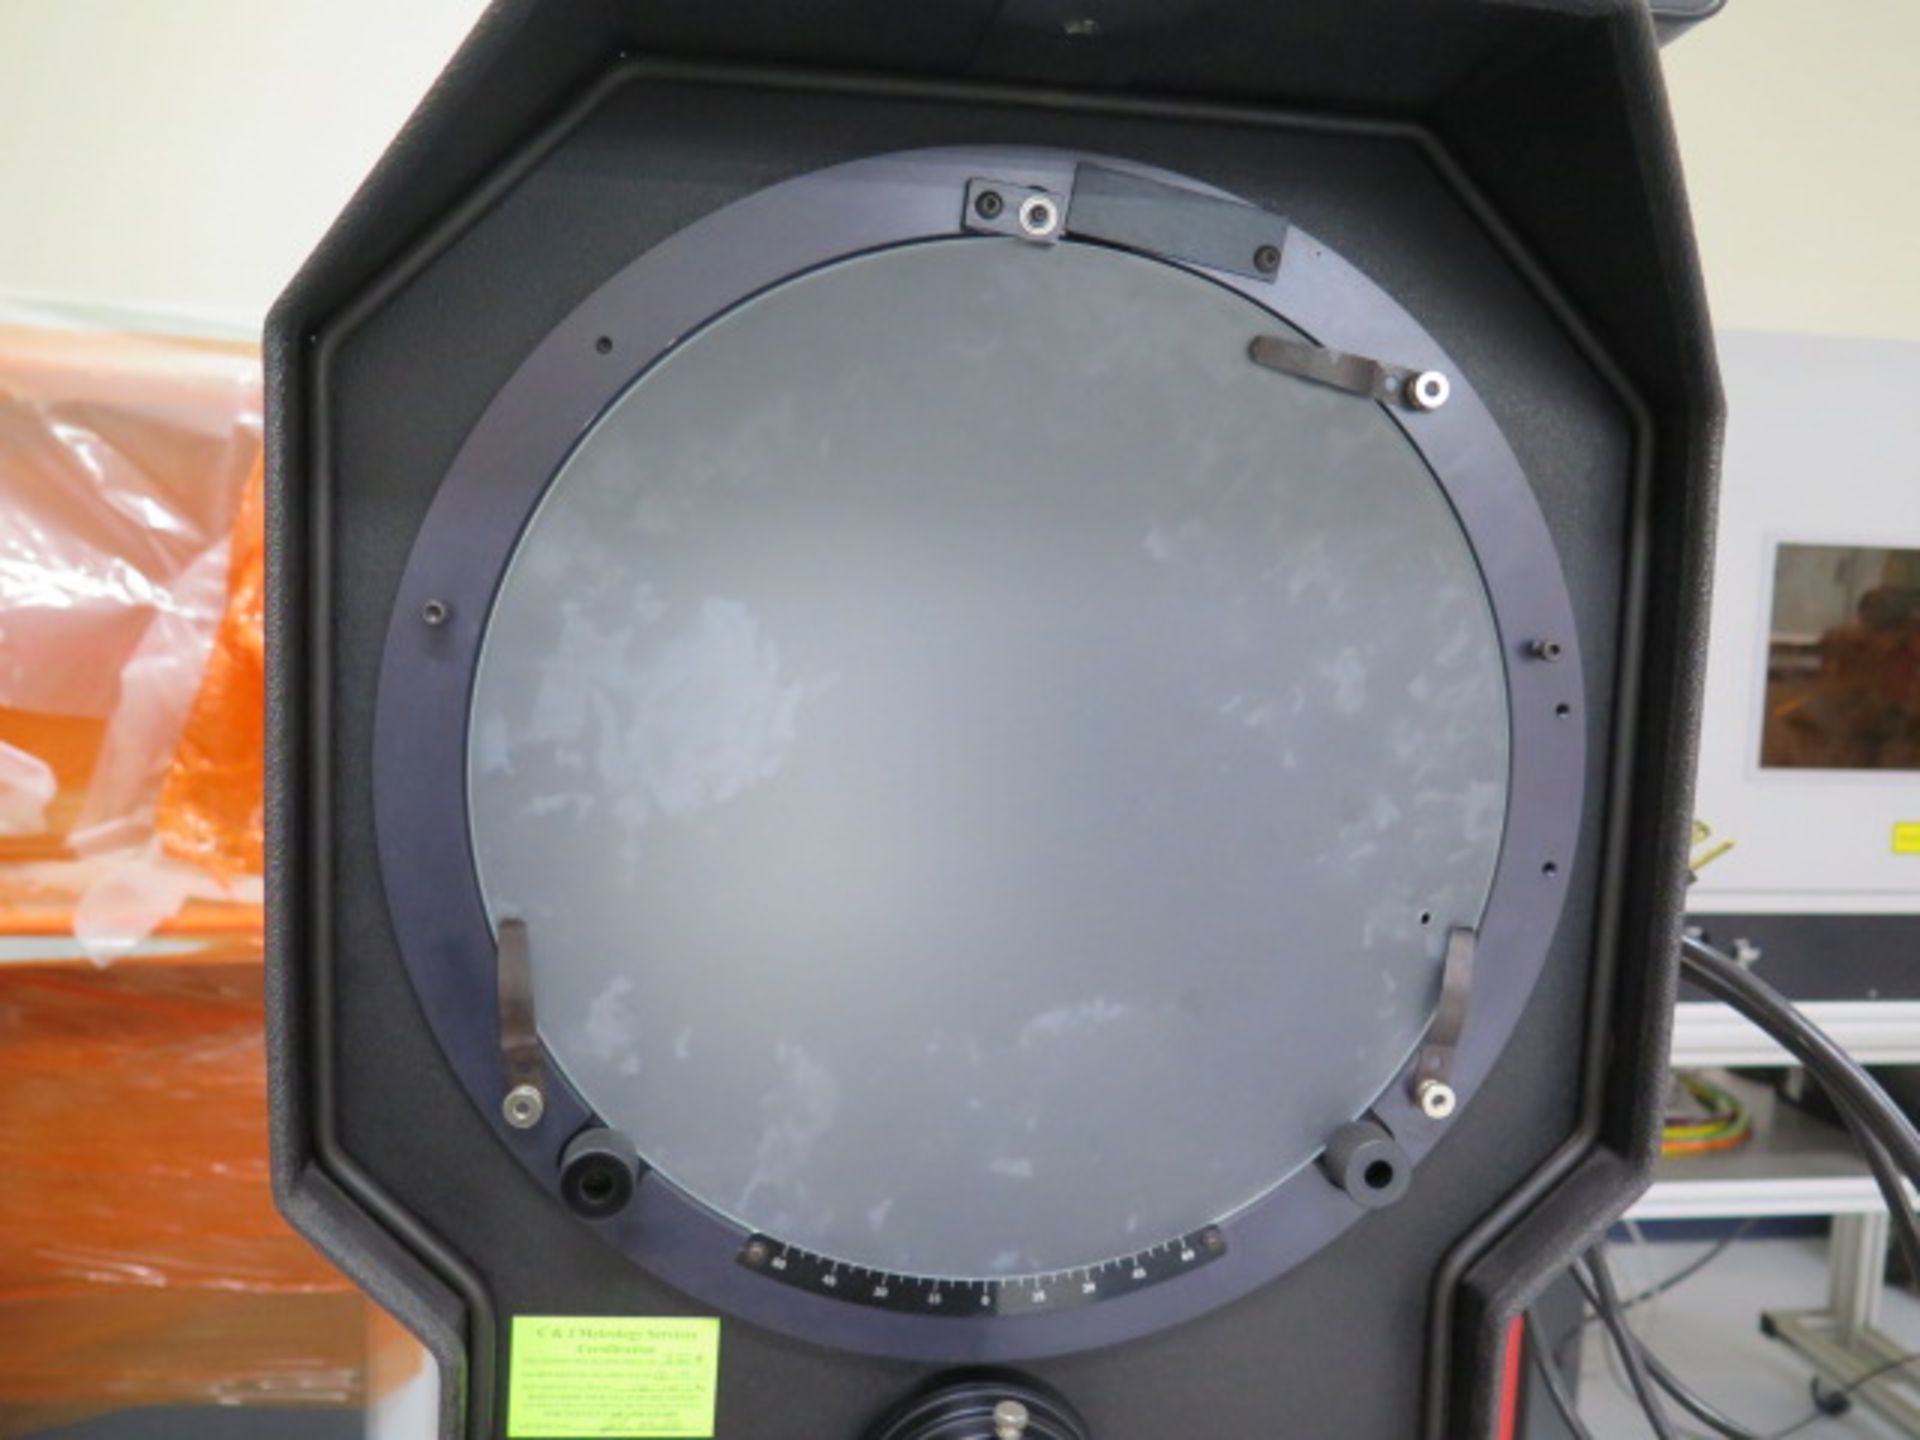 MicroVu mdl. H-14 14” Optical Comparator s/n 3328 w/ Sargon DRO, Surface and Profile, SOLD AS IS - Image 4 of 9